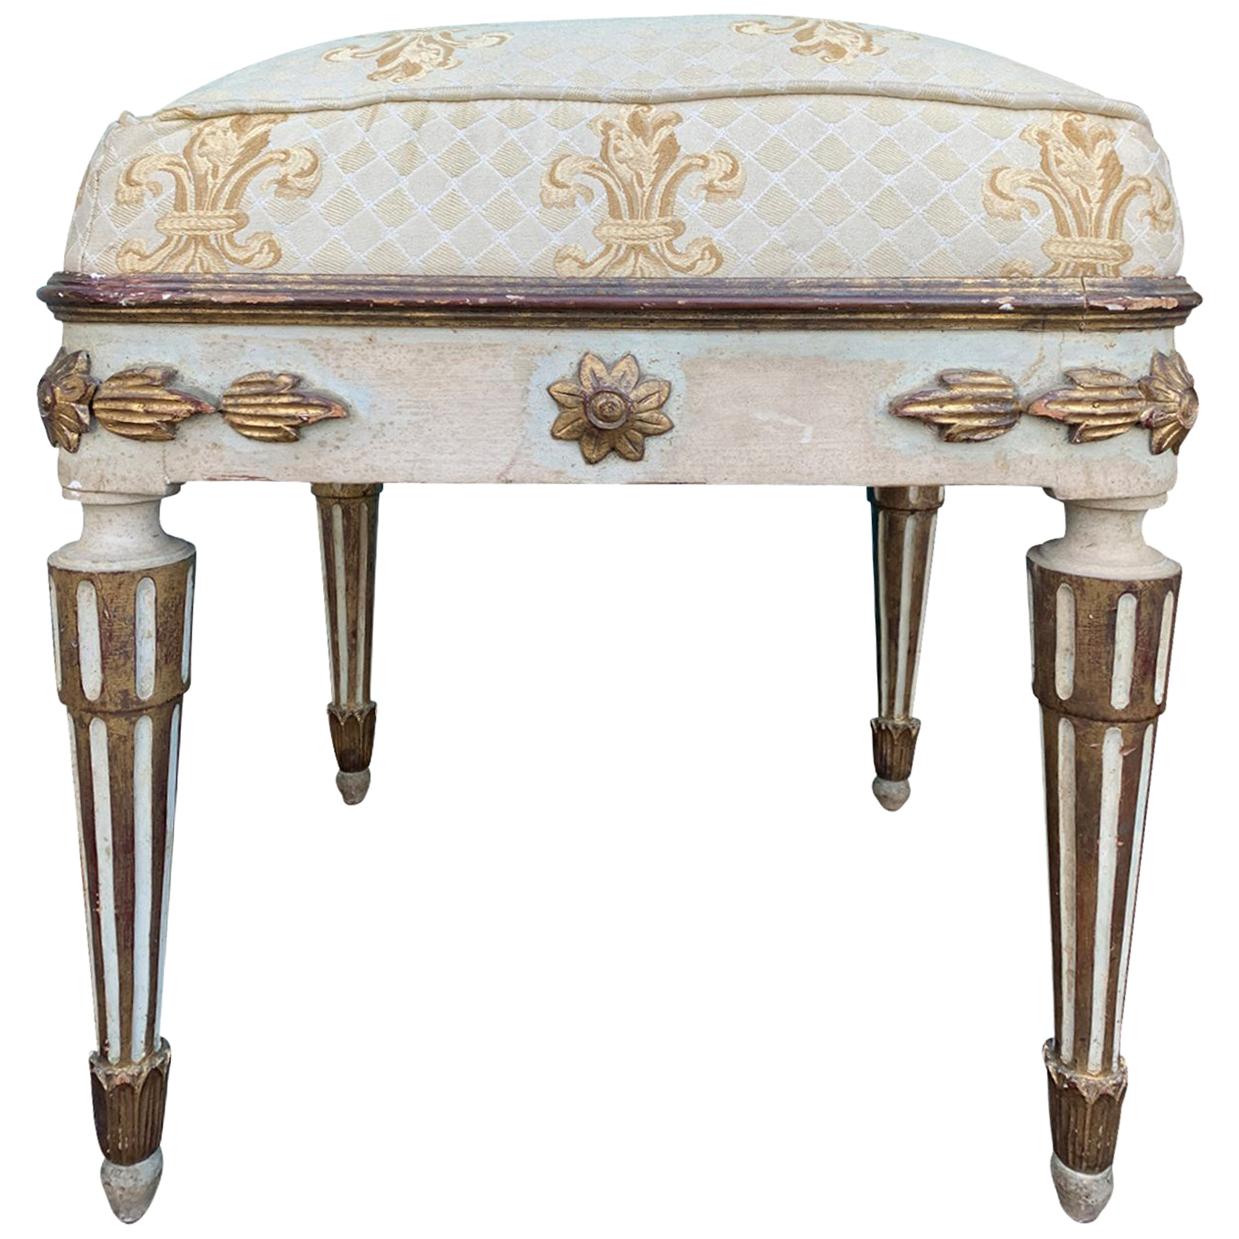 19th-20th Italian Neoclassical Polychrome Stool with handwritten "Made in Italy"